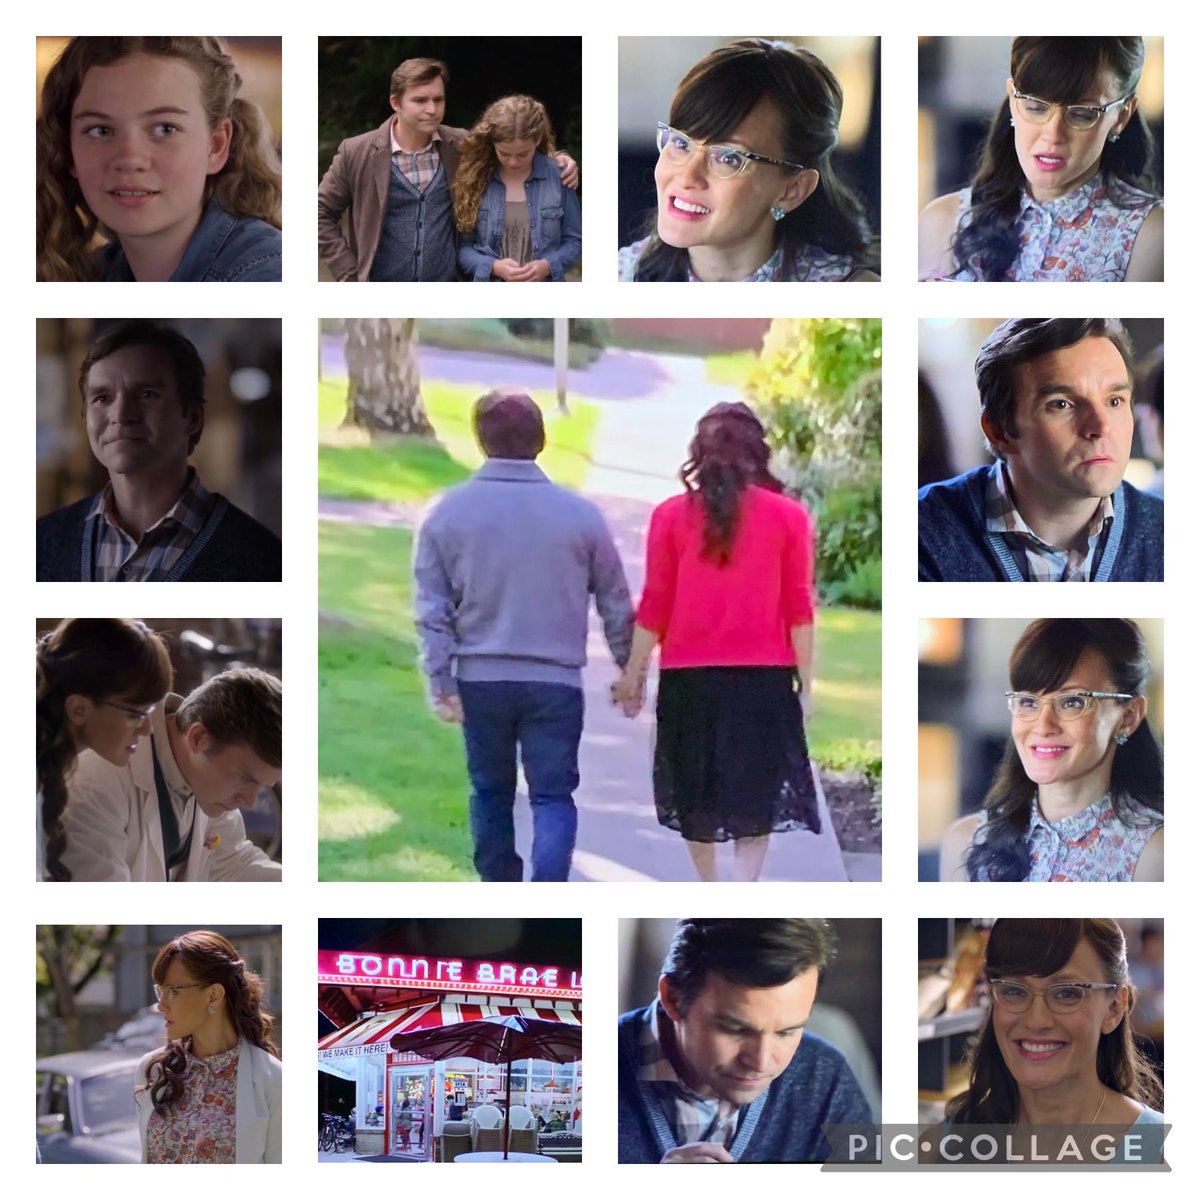 #POstables #TruthBeTold We can’t wait to see more great hugs and more walks holding hands from our two favorite couples! Bring on the O’Tooles and the Dormans! We are ready for more letter mysteries with the #POstables! #LoveLikeSSD #WeAreFOREVERPOstables #SSDForever